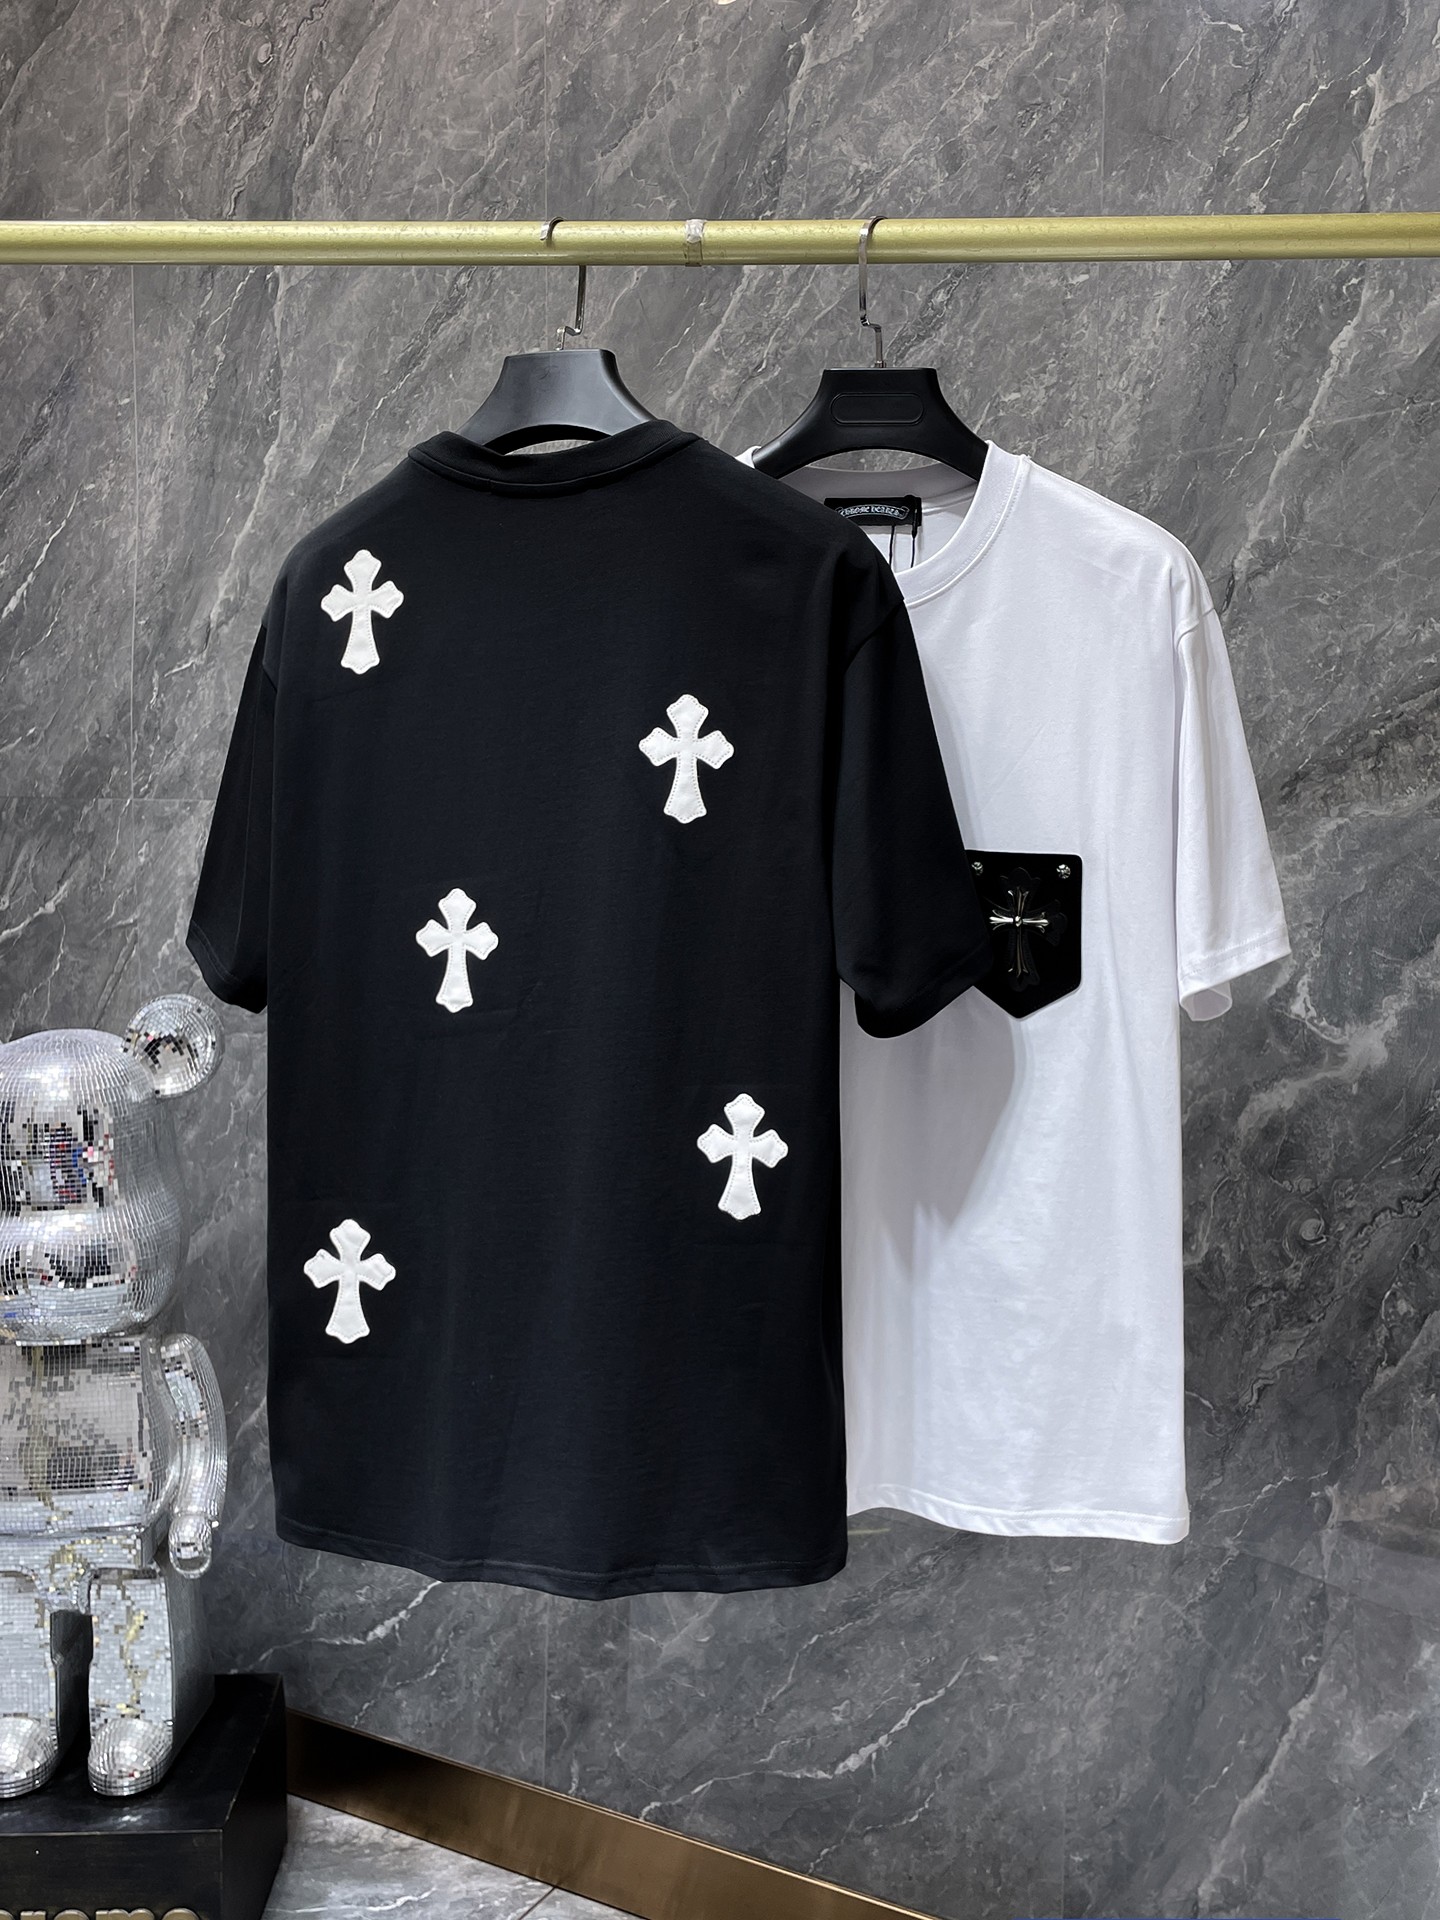 Perfect Quality
 Chrome Hearts Clothing T-Shirt Black White Summer Collection Short Sleeve